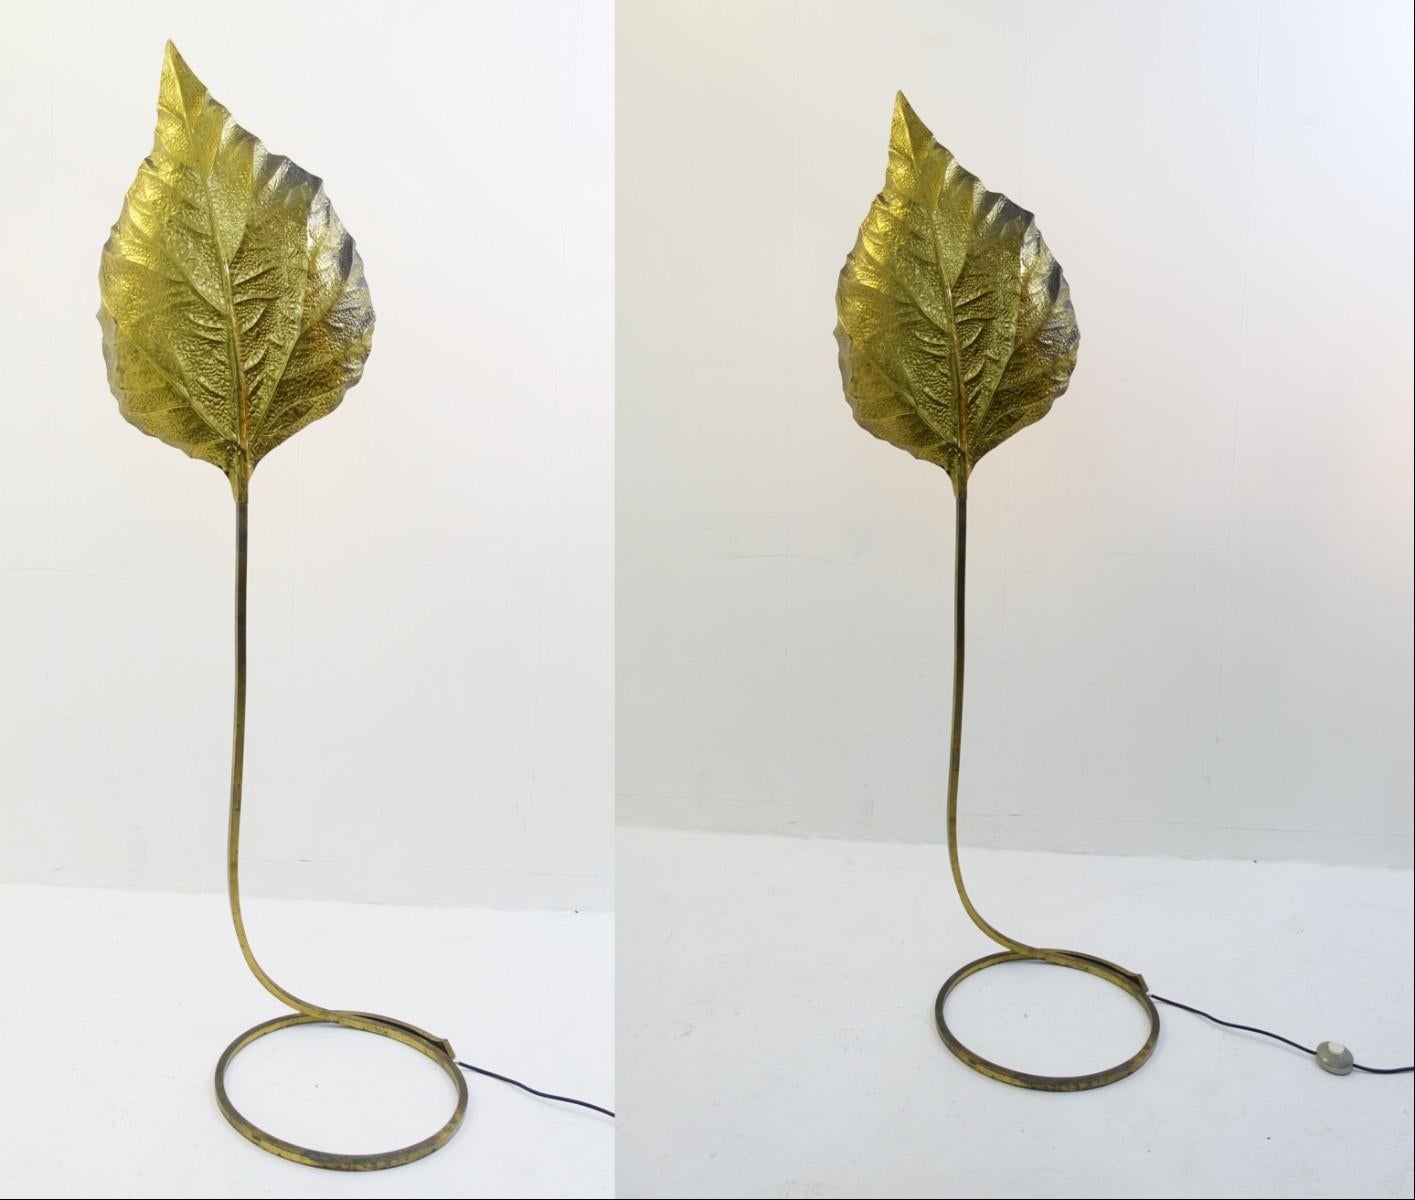 Leaf-shaped floor lamp in brass by Tommaso Barbi, Italy, 1970s, 2 available.

Price is fore one item.